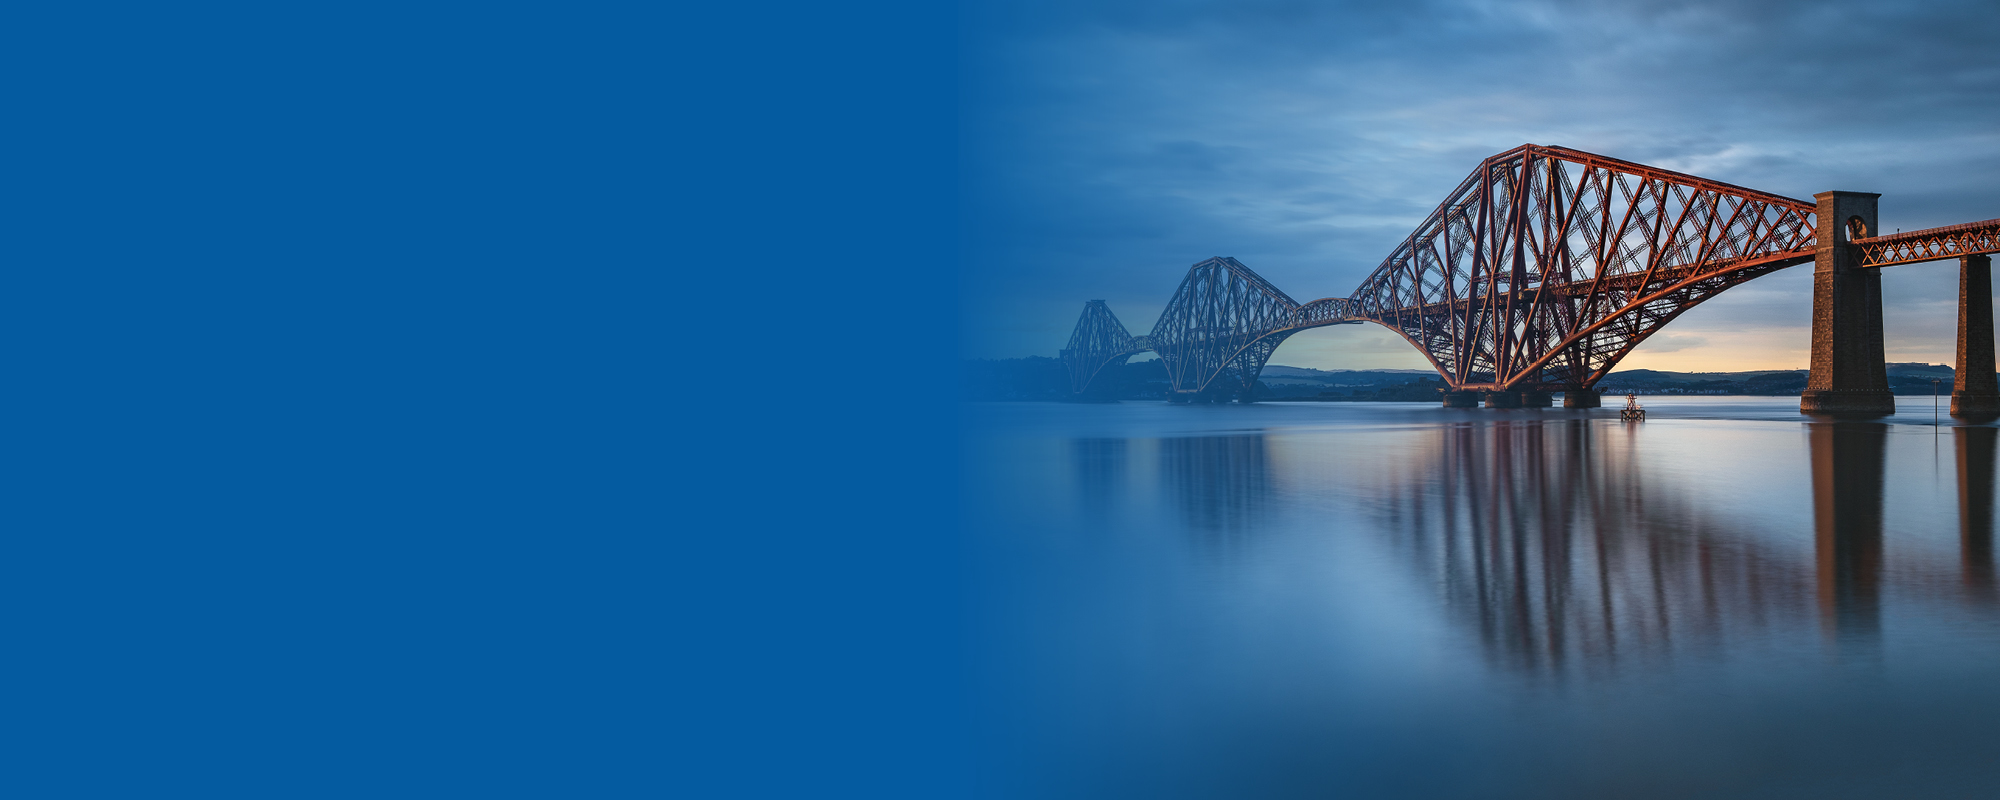 A image of the dark red Forth Rail bridge, with the river below and a blue sky above.